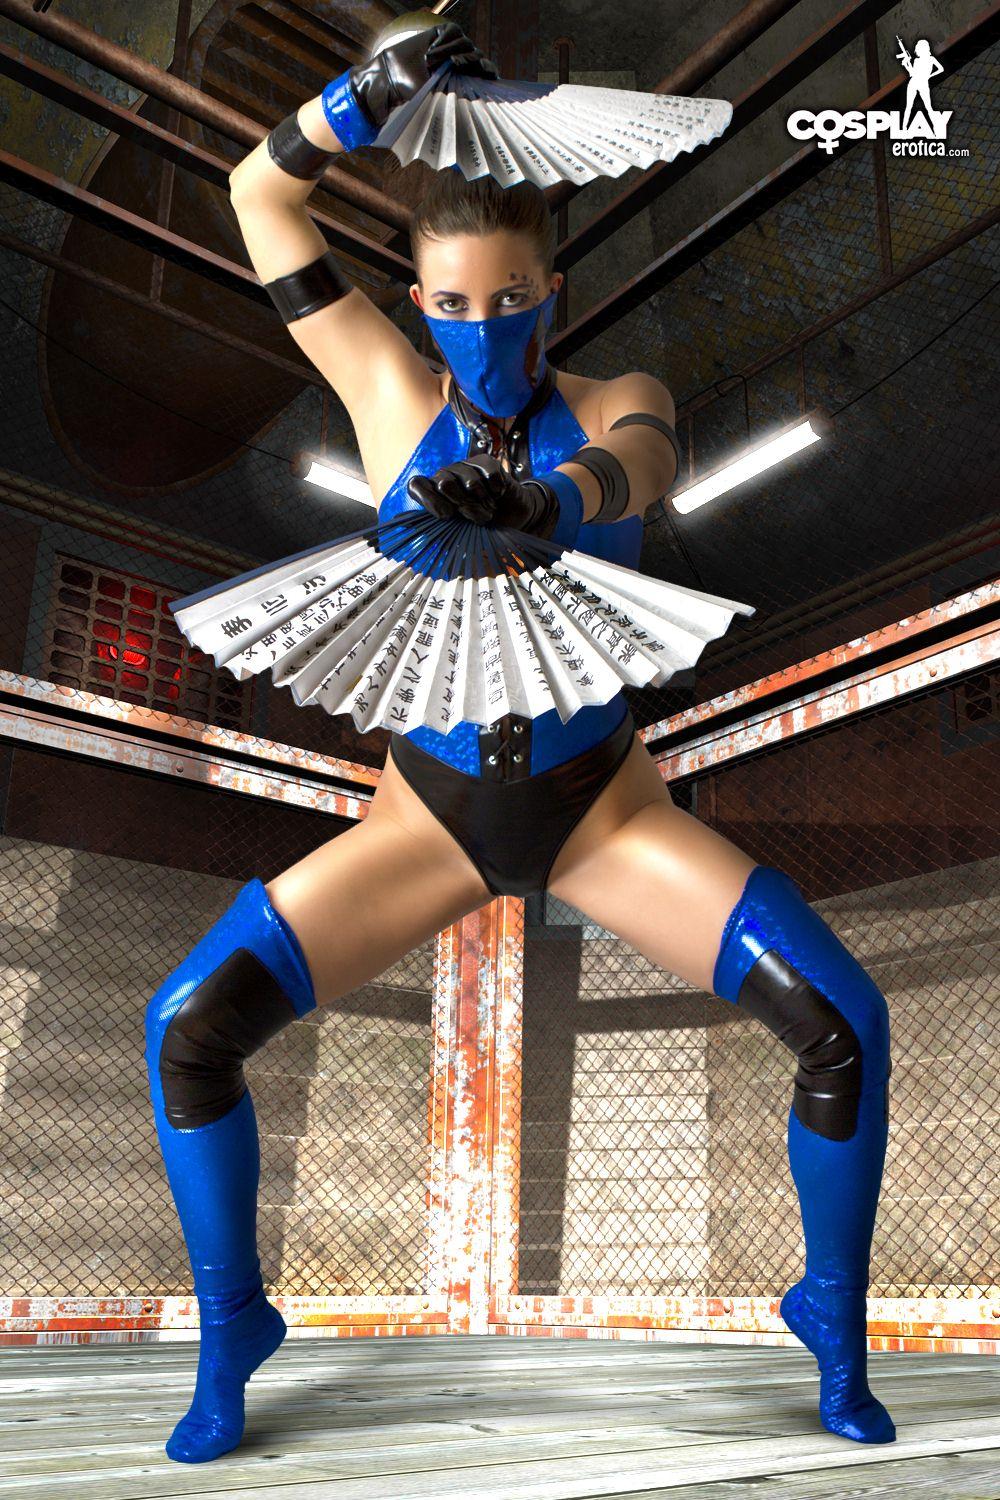 Pictures of sexy cosplayer Gogo dressed as Kitana from Mortal Kombat #54561257